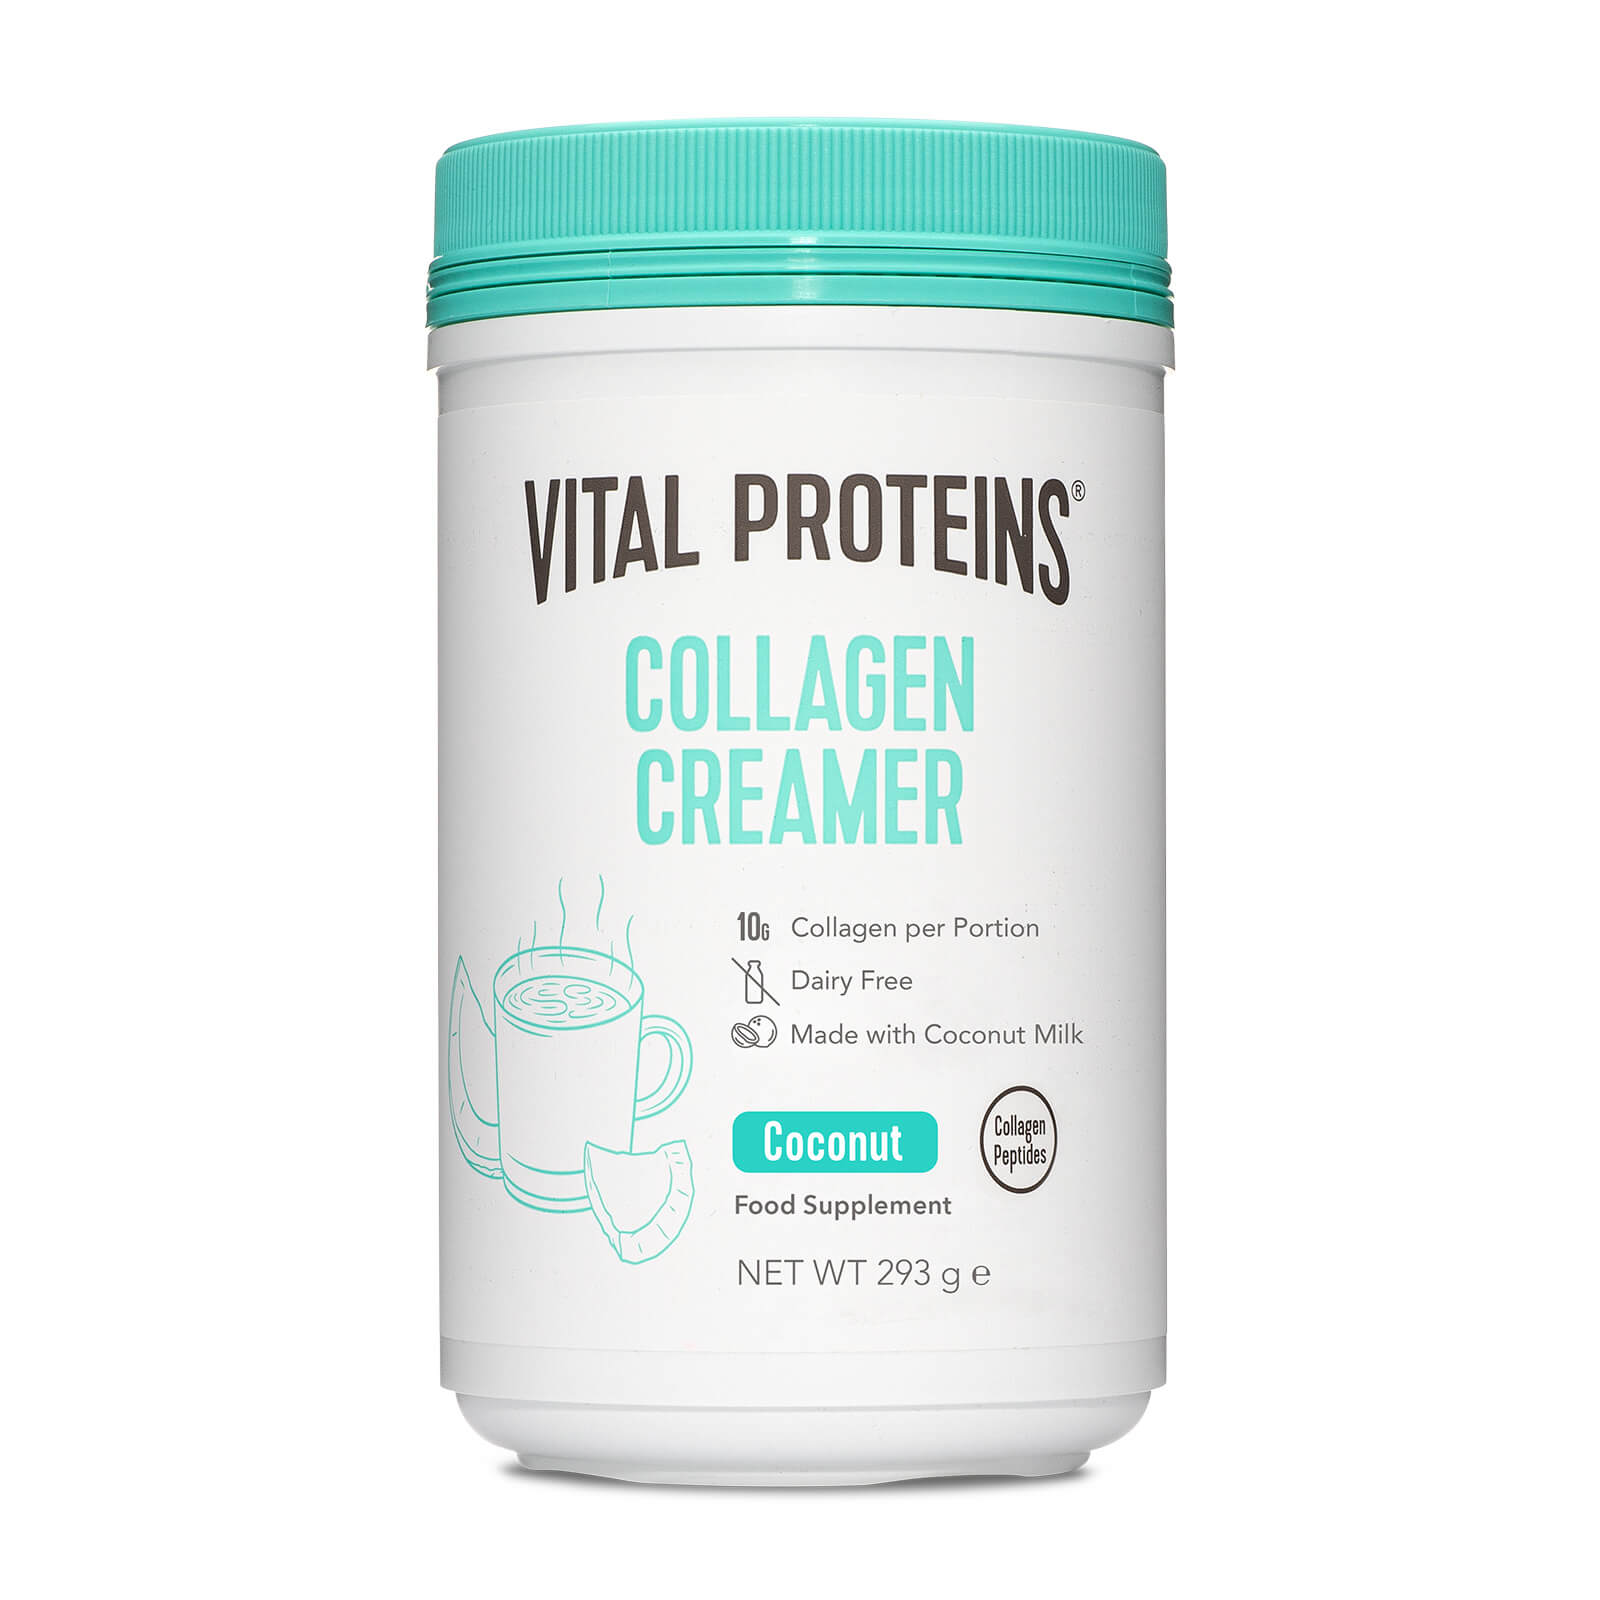 Collagen Creamer - Coconut Subscription - Delivery Every 2 Months